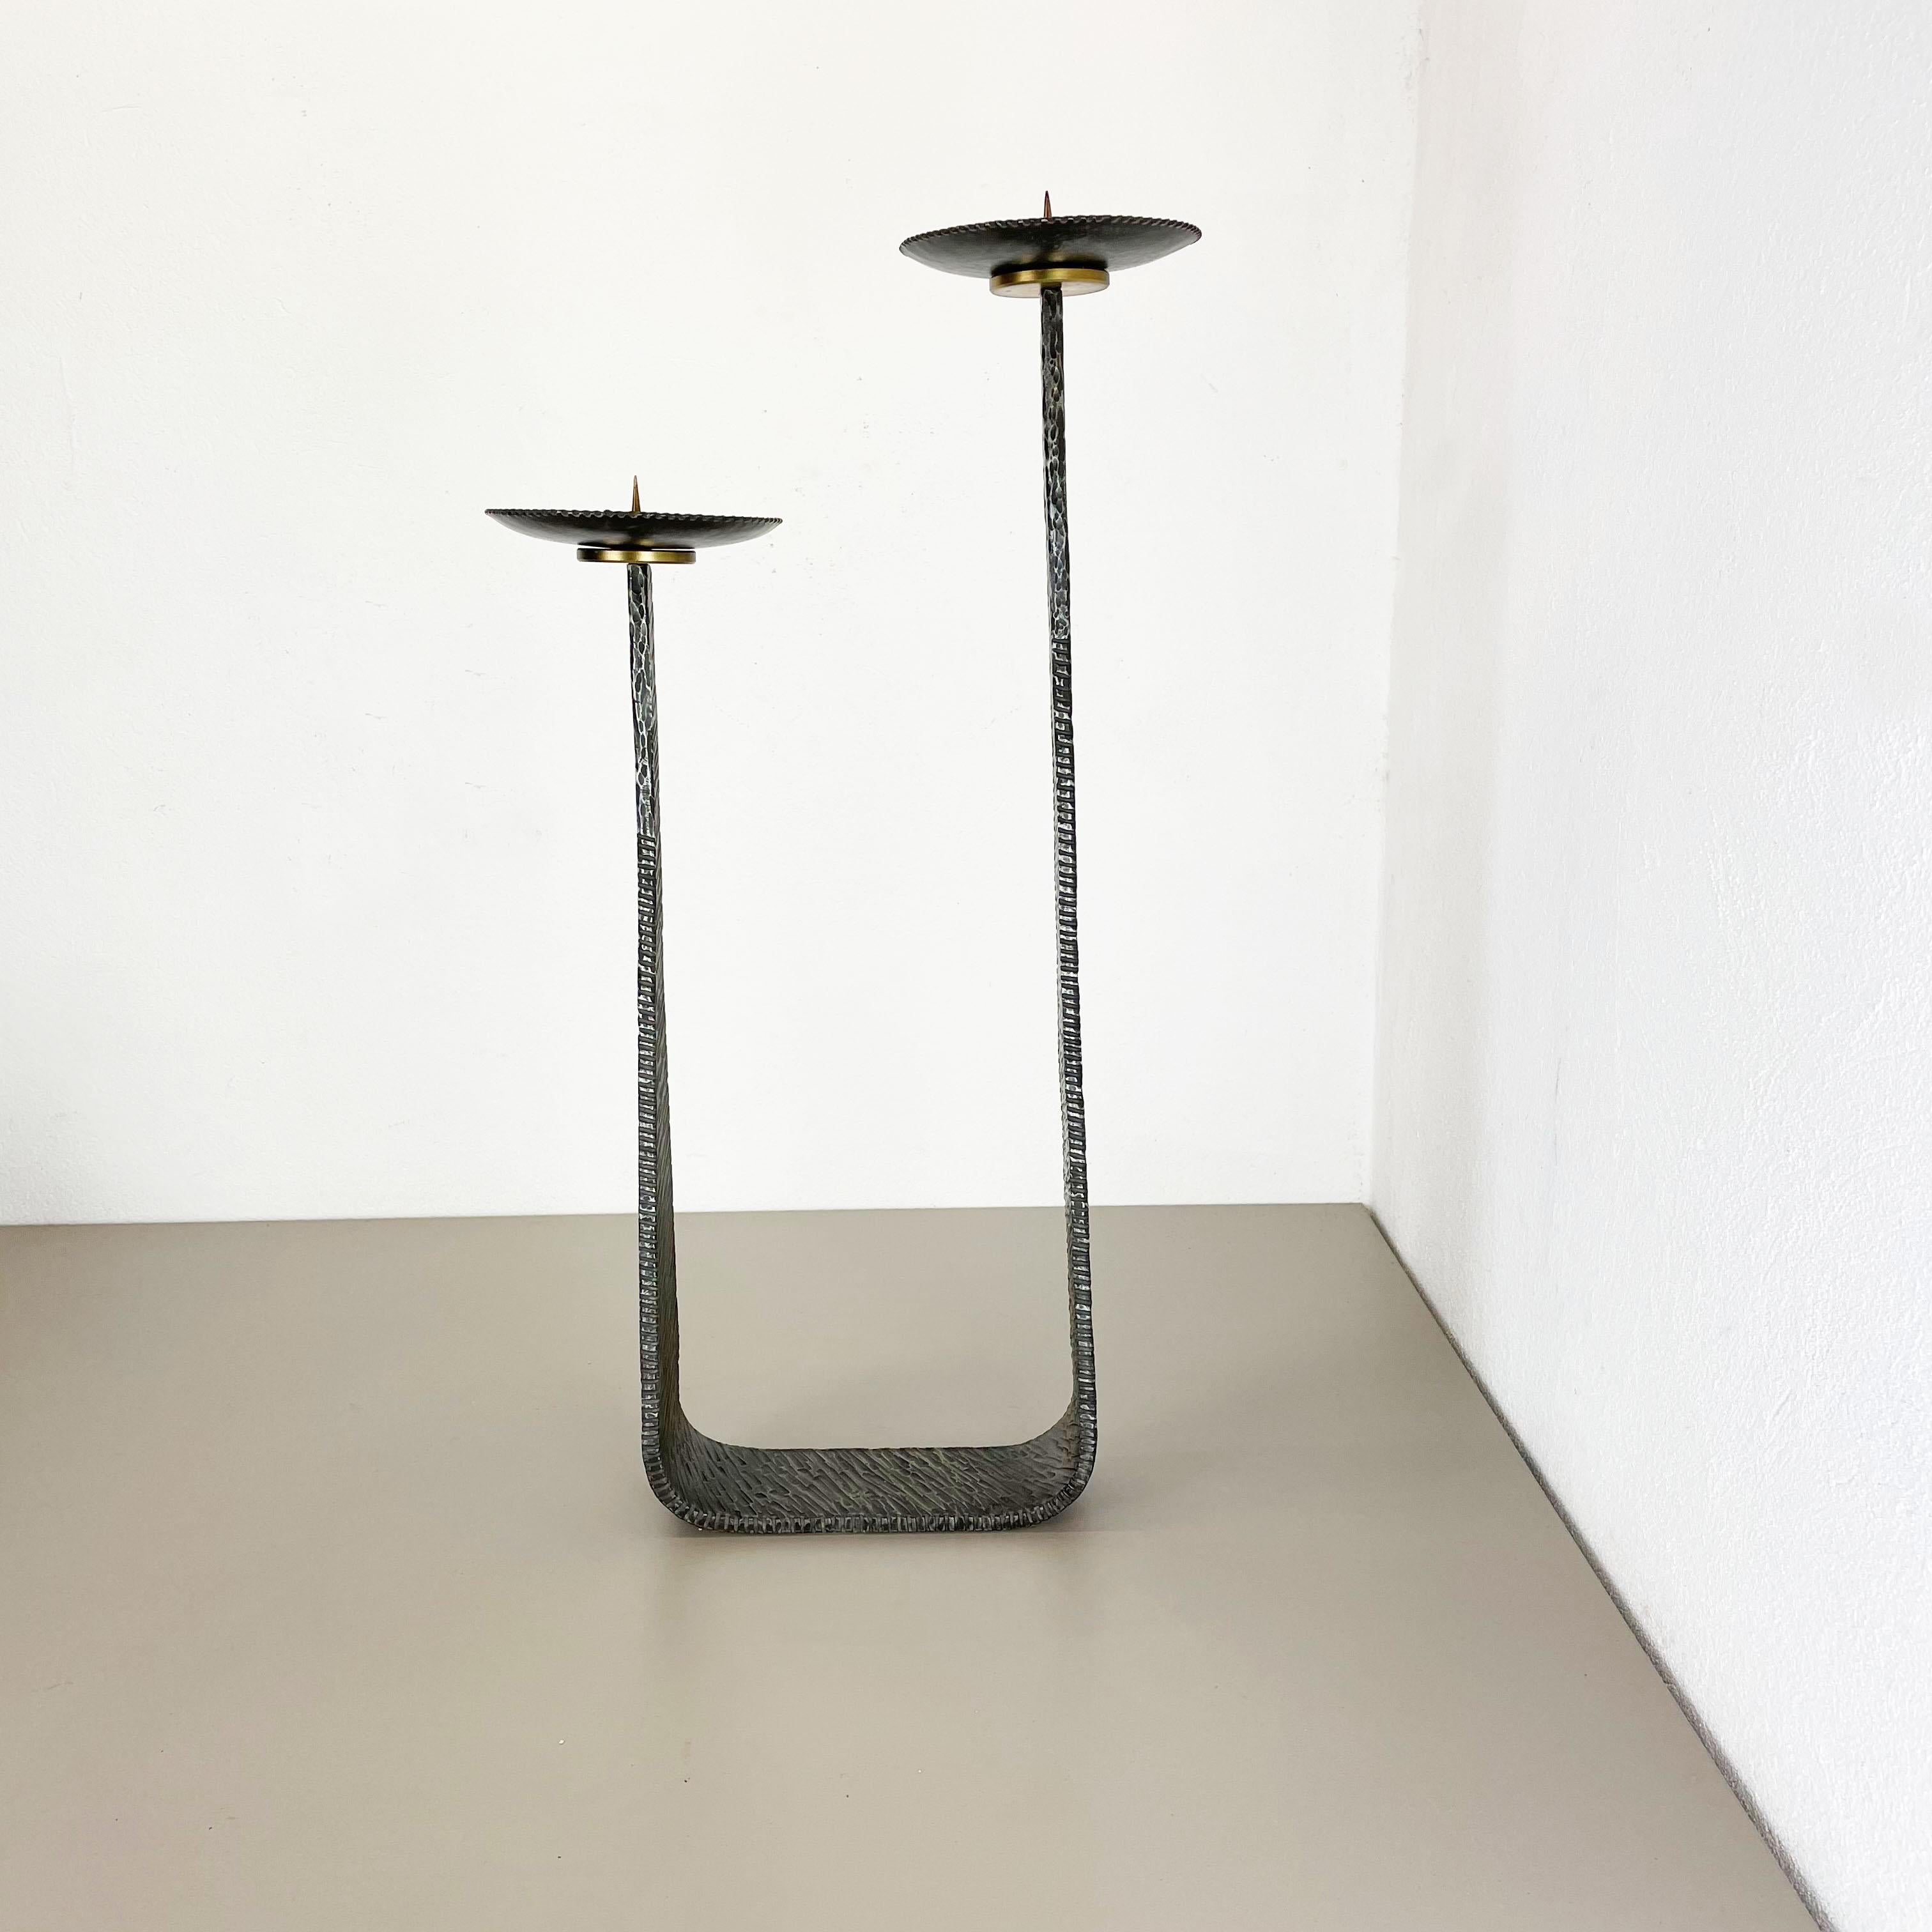 Article: Brutalist floor candleholder

Origin: Germany

Material: Solid metal candleholder

Decade: 1970s

Description: This original vintage candleholder, was produced in the 1970s in germany. it is made of solid heavy metal, and has a